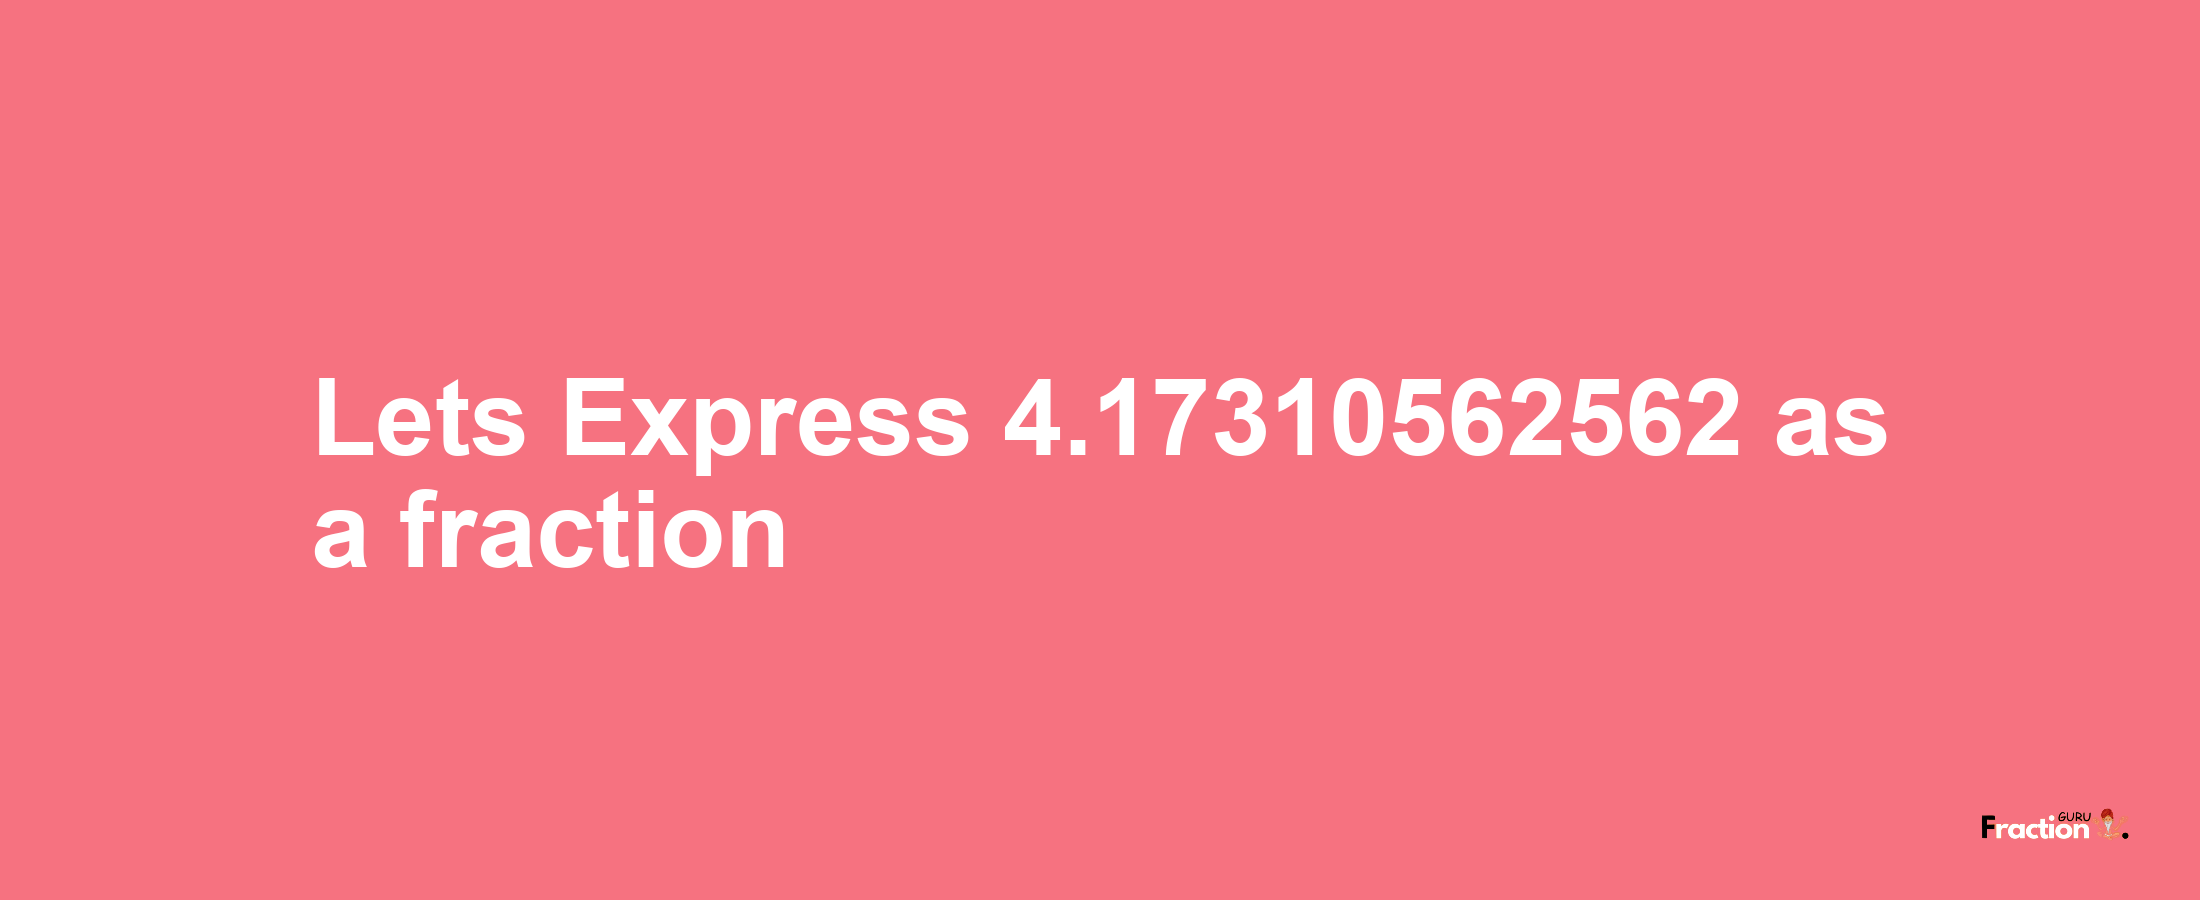 Lets Express 4.17310562562 as afraction